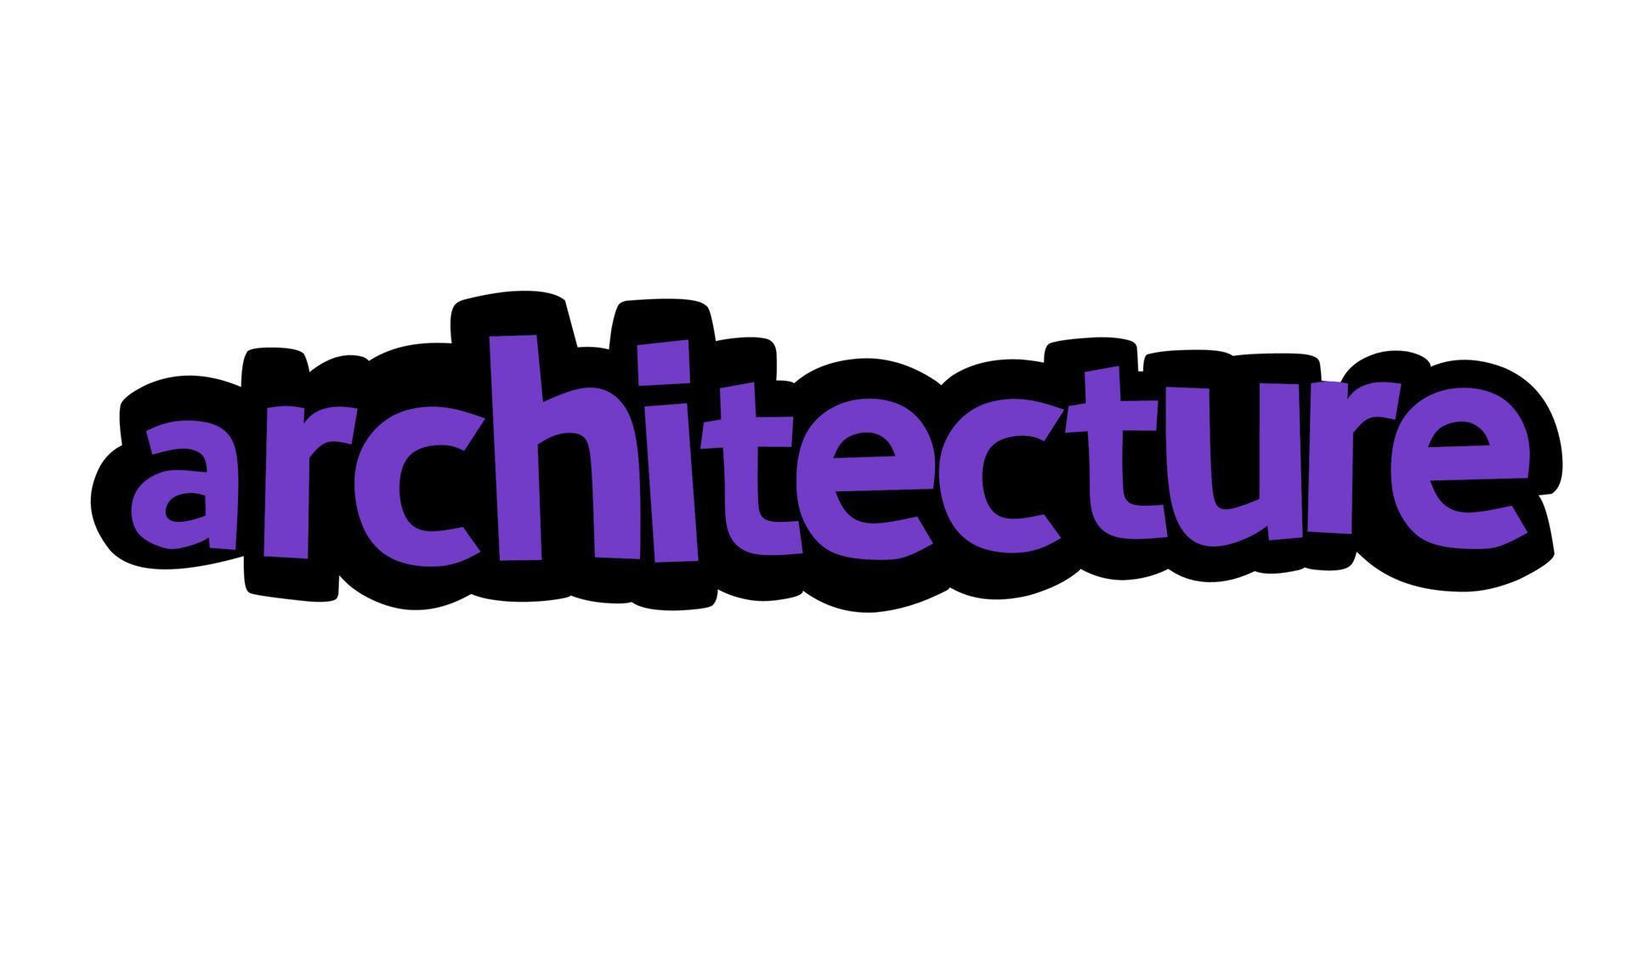 ARCHITECTURE writing vector design on white background